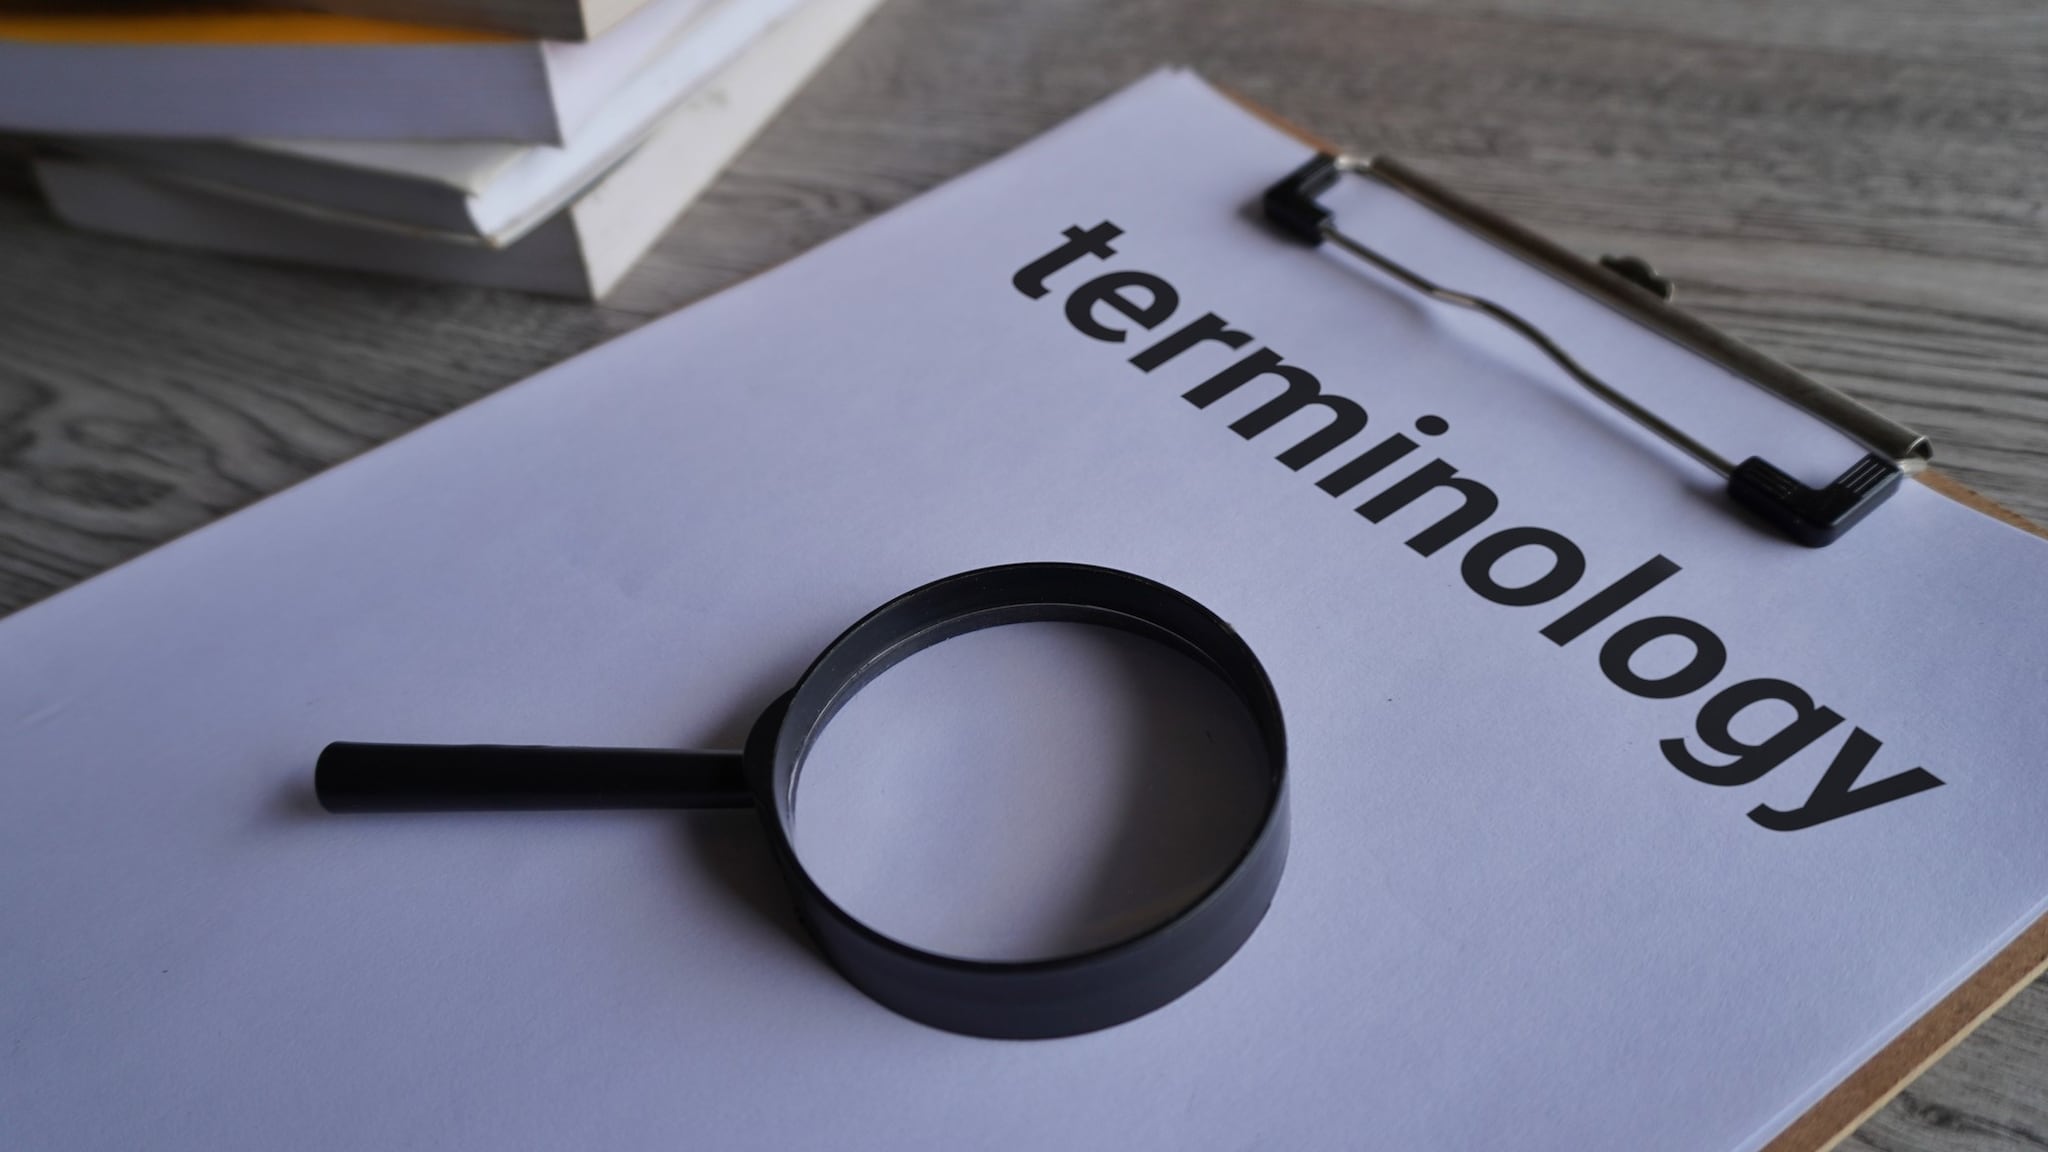 Magnifying glass and clipboard with paper and the word "terminology"